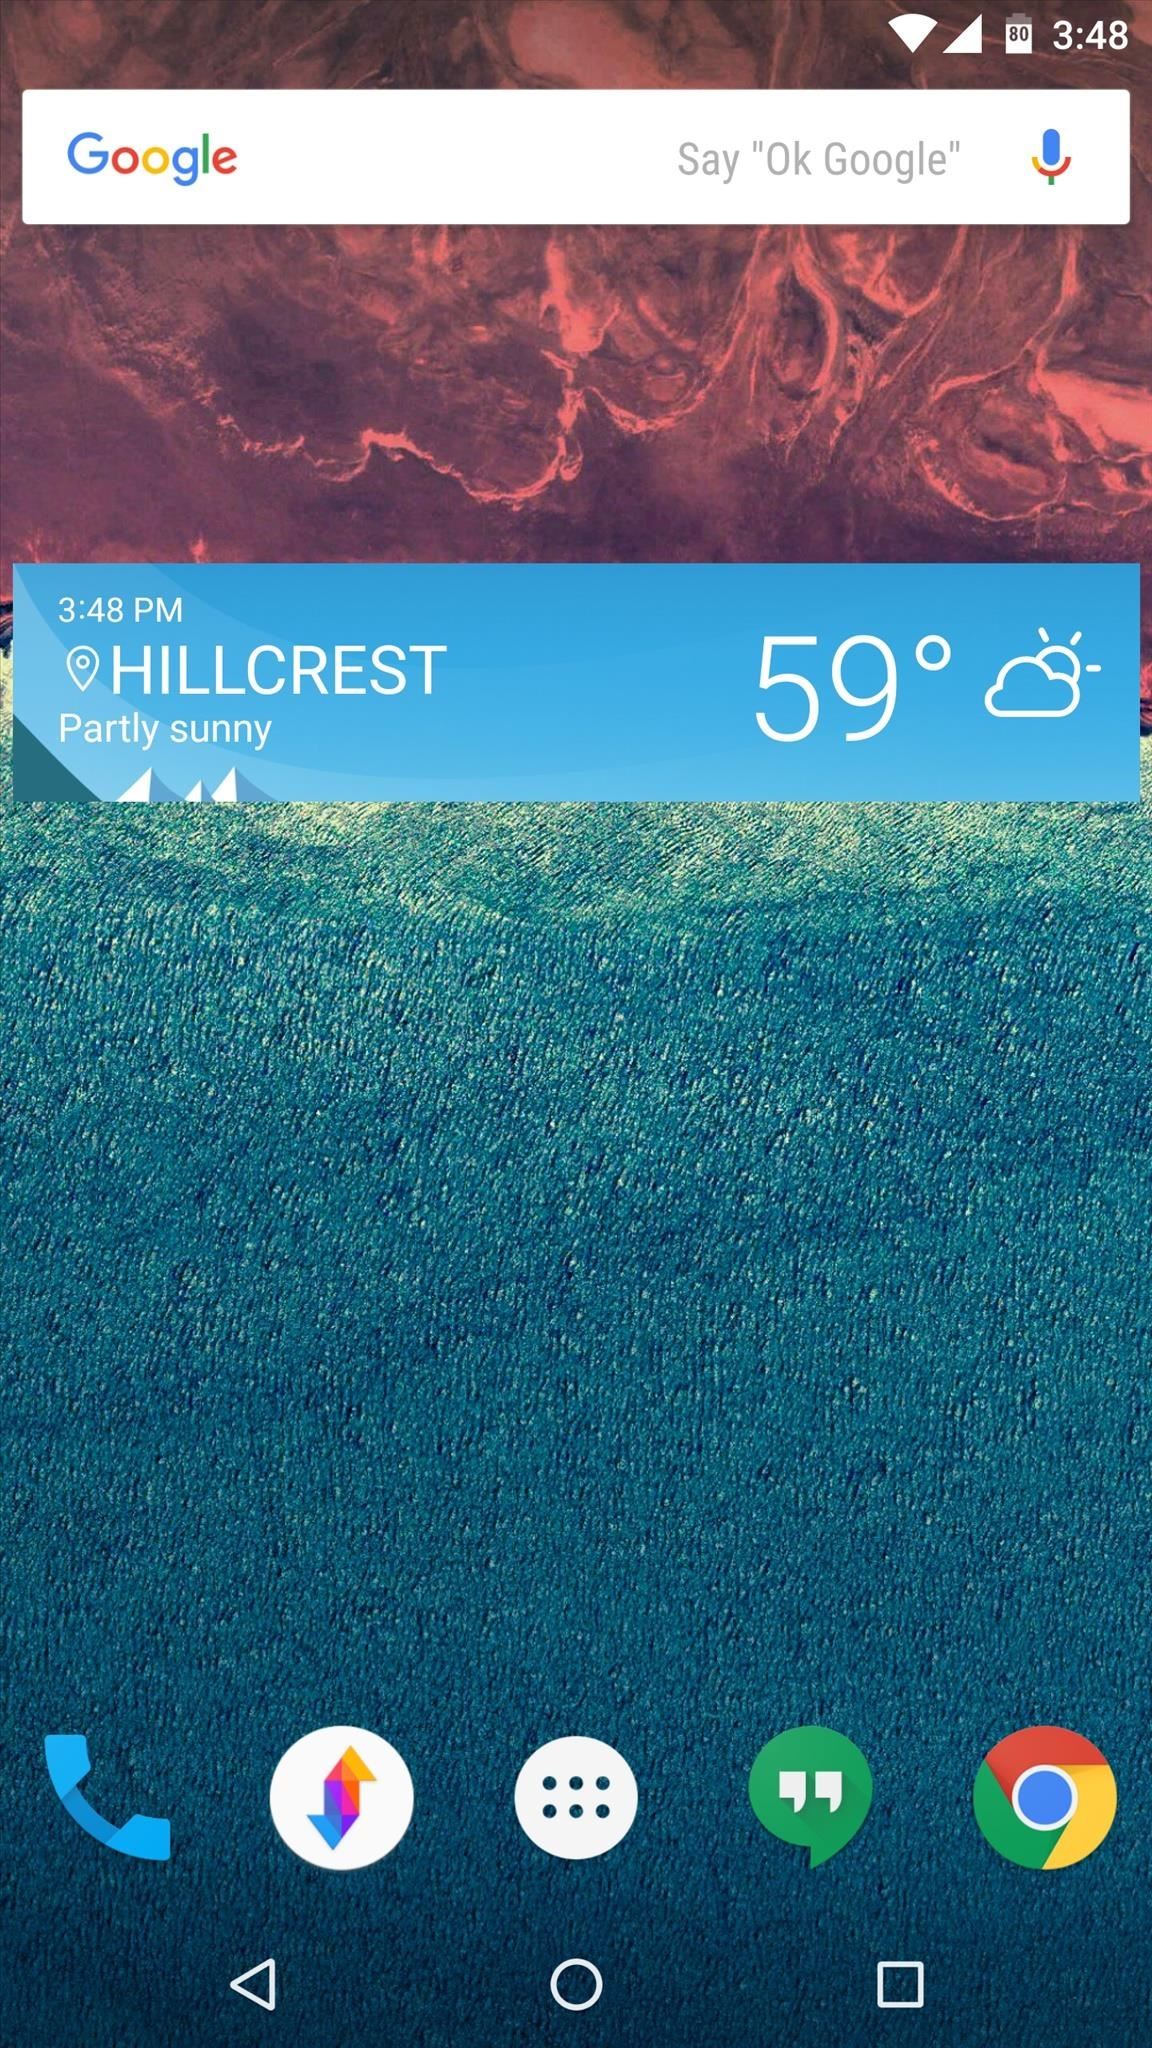 How to Get Sony's Xperia Weather App on Any Android Device